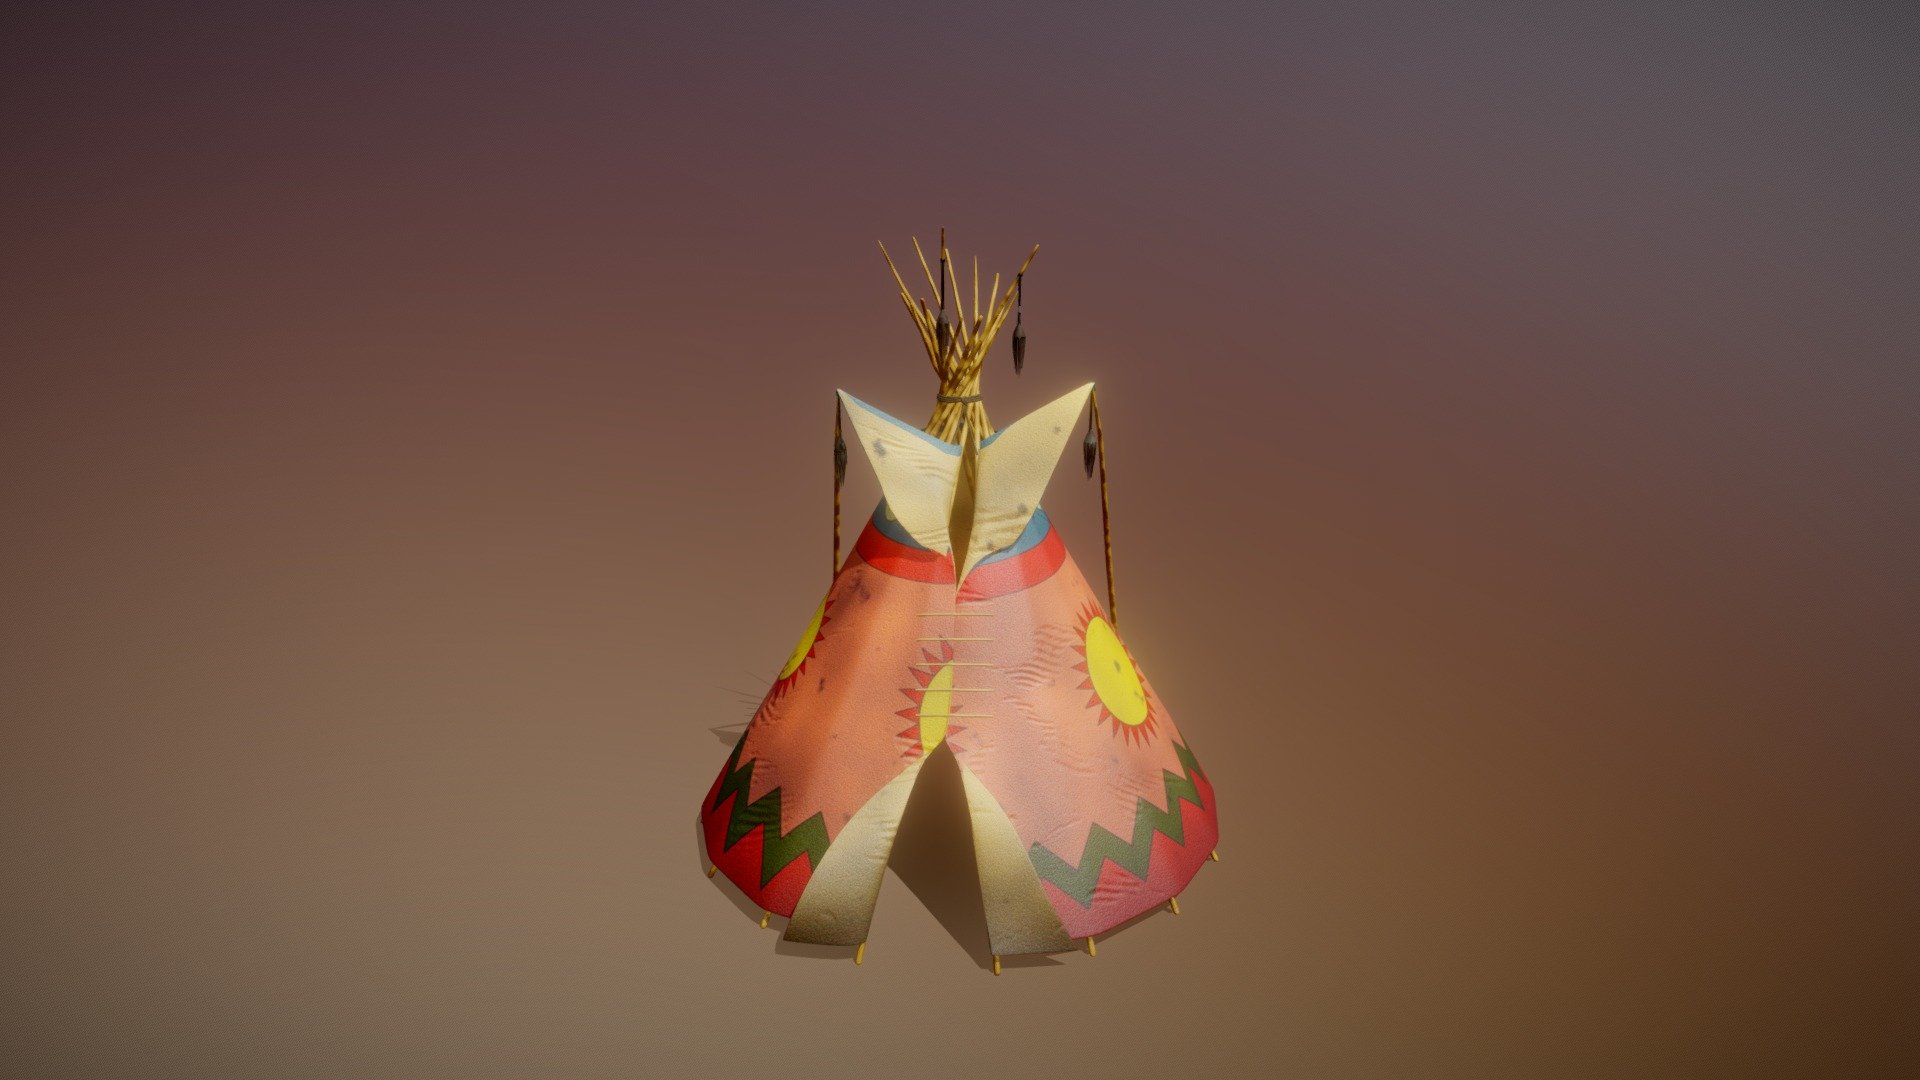 3D model of a tipi tent, with four different cover patterns included.
Created in Blender. 
Whole model is textured, with fully unwrapped UVs. 4096x4096 PNG texture maps are provided (color, roughness, normal). Four separate color maps can be used to display desired pattern.
Model consists of 61965 faces and 54459 vertices. 
Project also includes original .blend file with unapplied modifiers, non destructive workflow, and separate properly named objects.
Model is carefully shaped with accurate proportions, and it's ideal for photorealistic visualizations 3d model